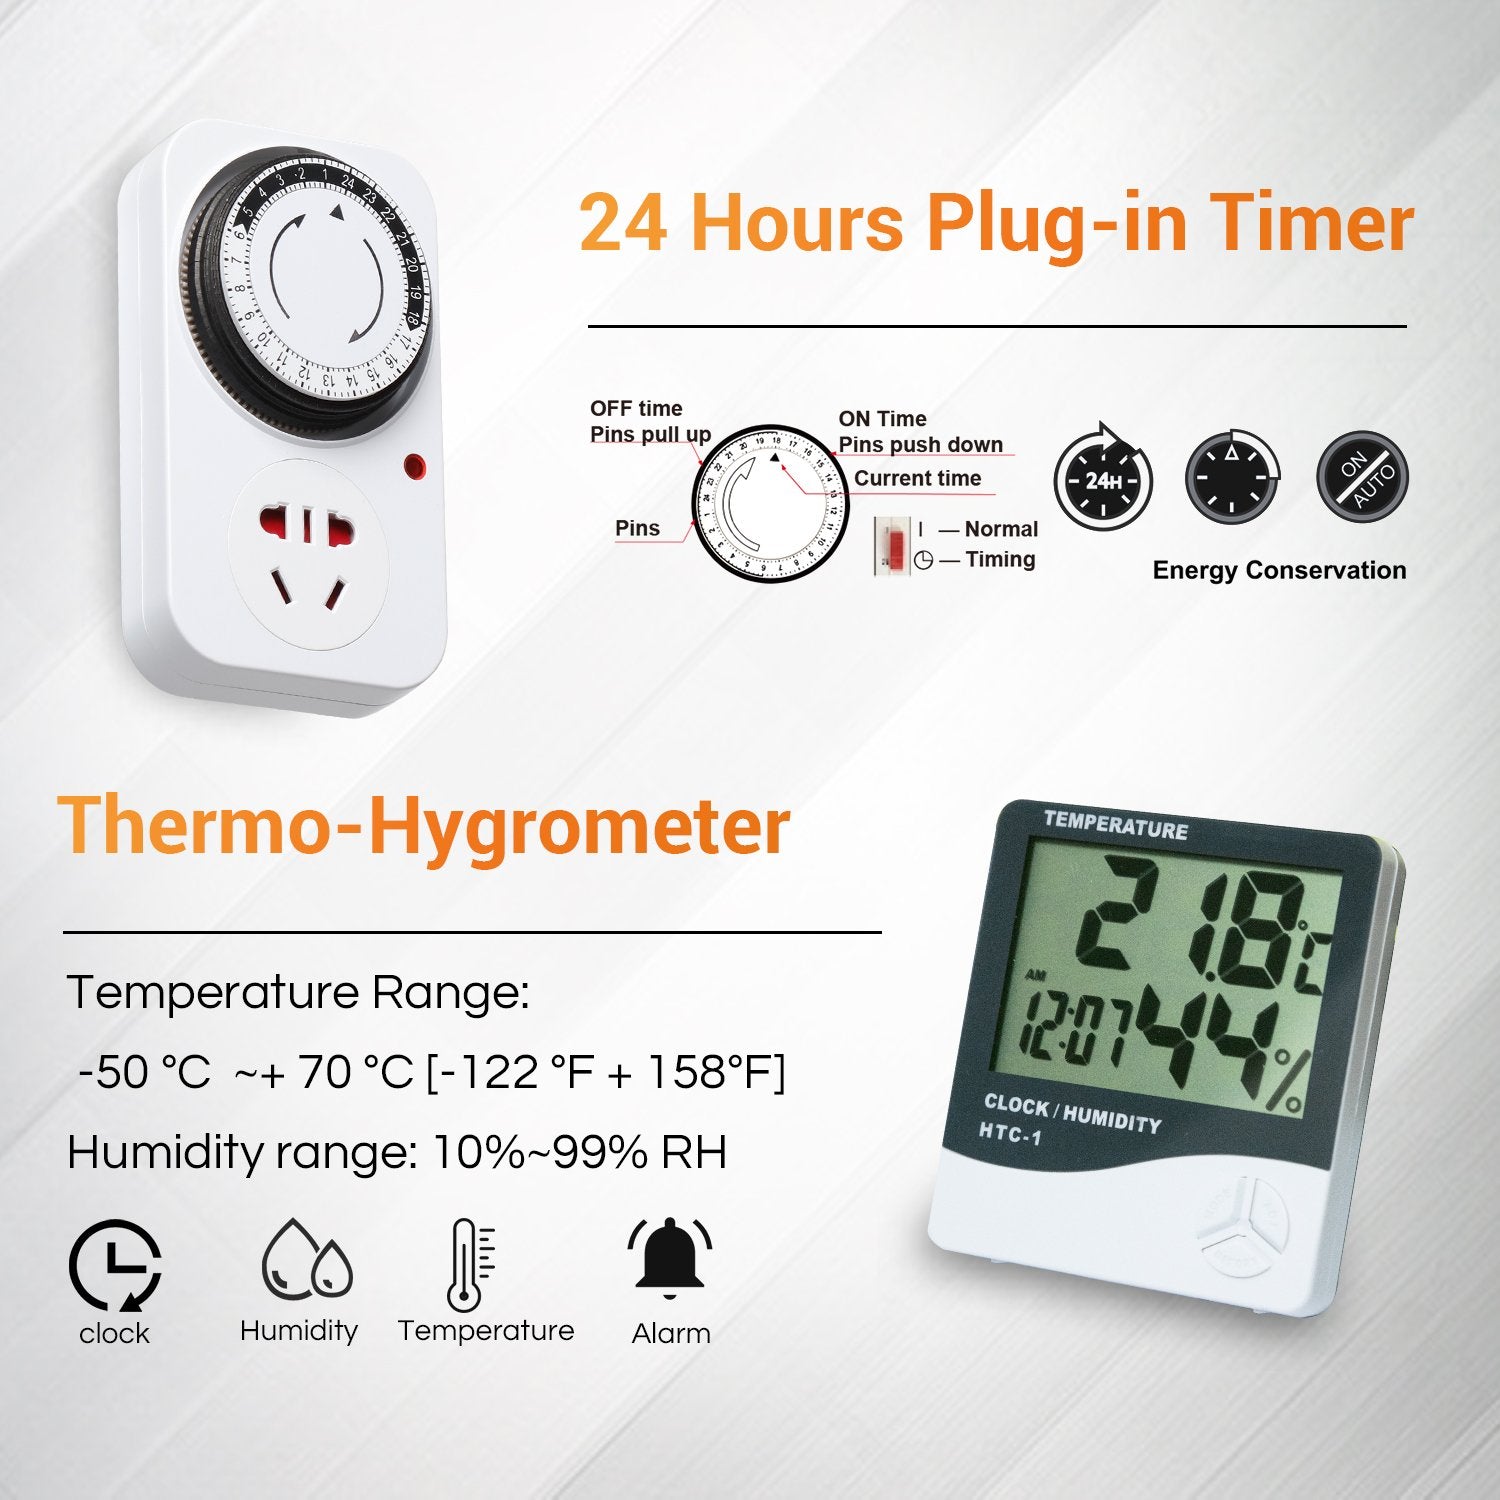 4 Fan Filter Kit Hygrometer Thermometer 24 Hour Timer Outlet for Hydroponics Grow Tent Ventilation System PrimeGarden 4 Inline Duct Ventilation Fan Vent Blower Carbon Filter Ducting Combo 